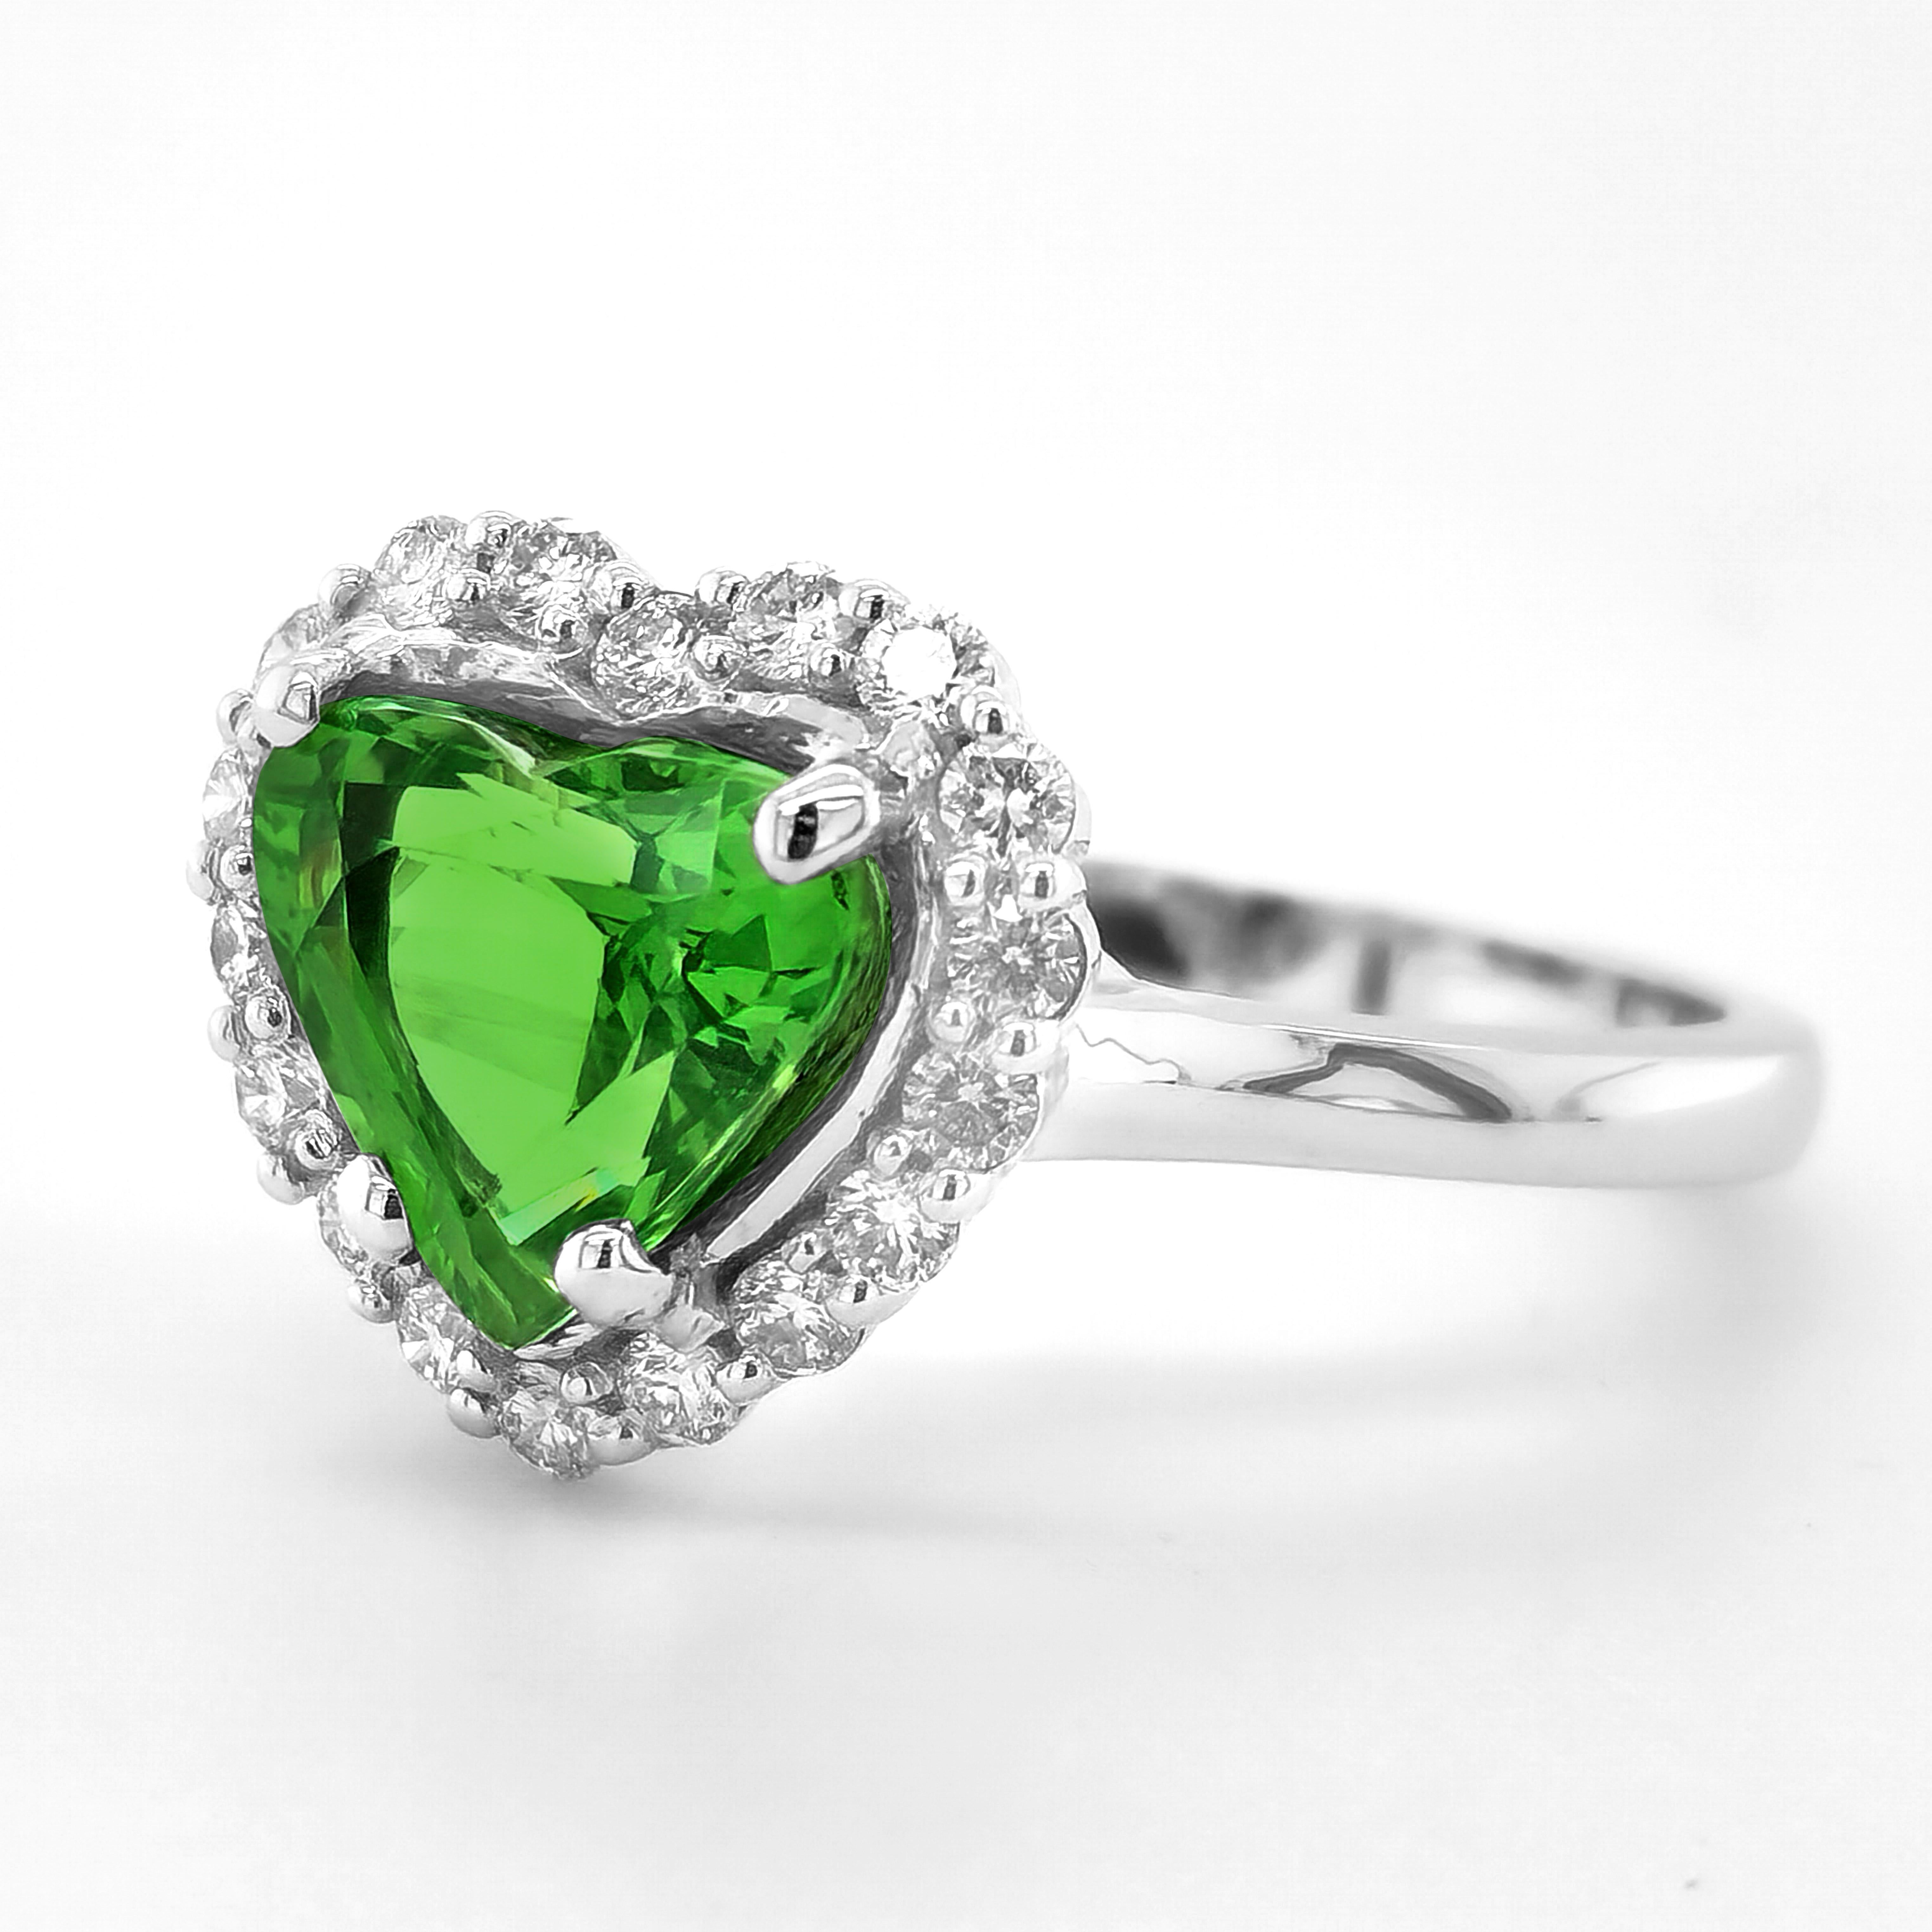 Set with a 2.79 carat Tsavorite Garnet, the richly colored gem is a riot of green. Deep, intense greens are know to symbolize luck and here is an exceptionally clear gem that has an internal fire that sets it apart. A heart shaped, paired with